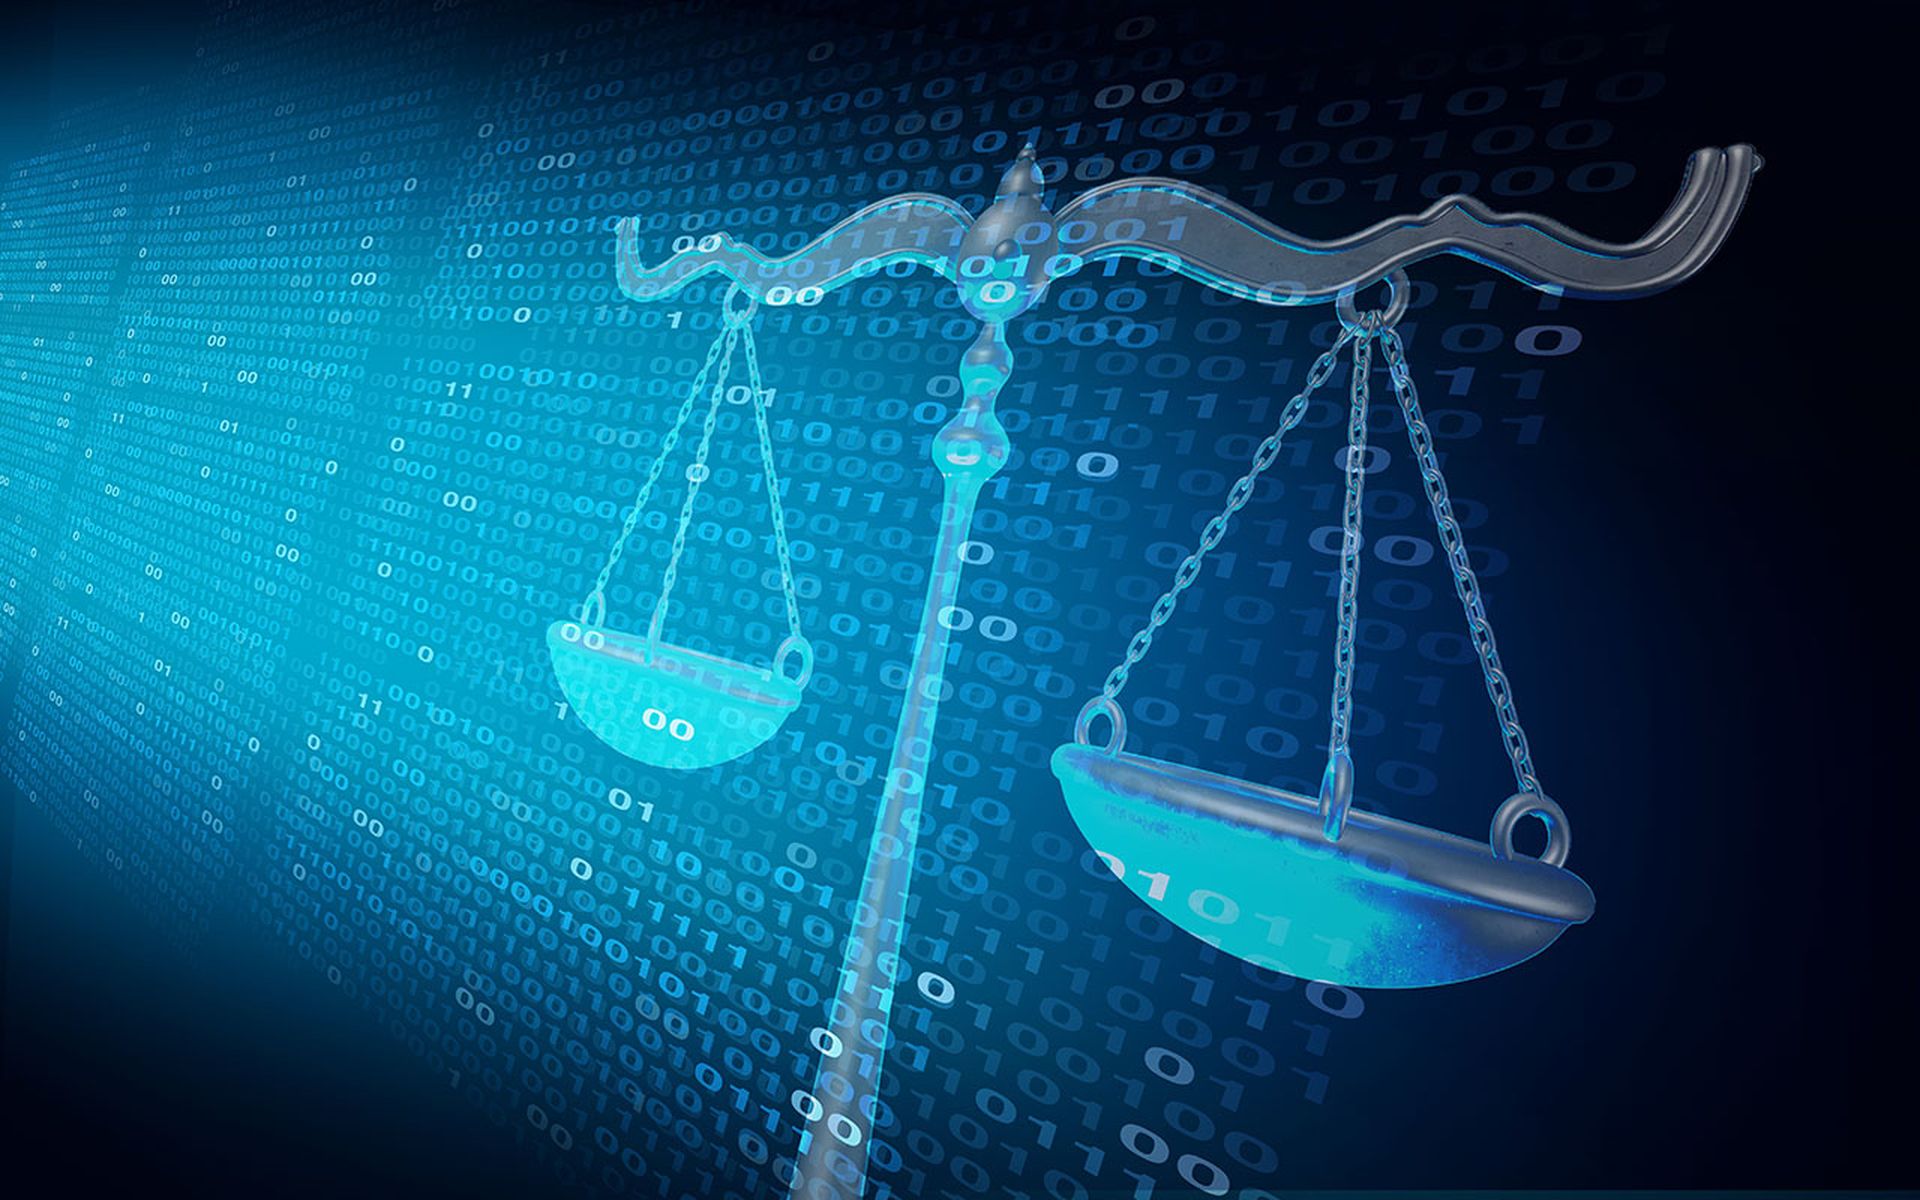 Cyber law, digital justice scales